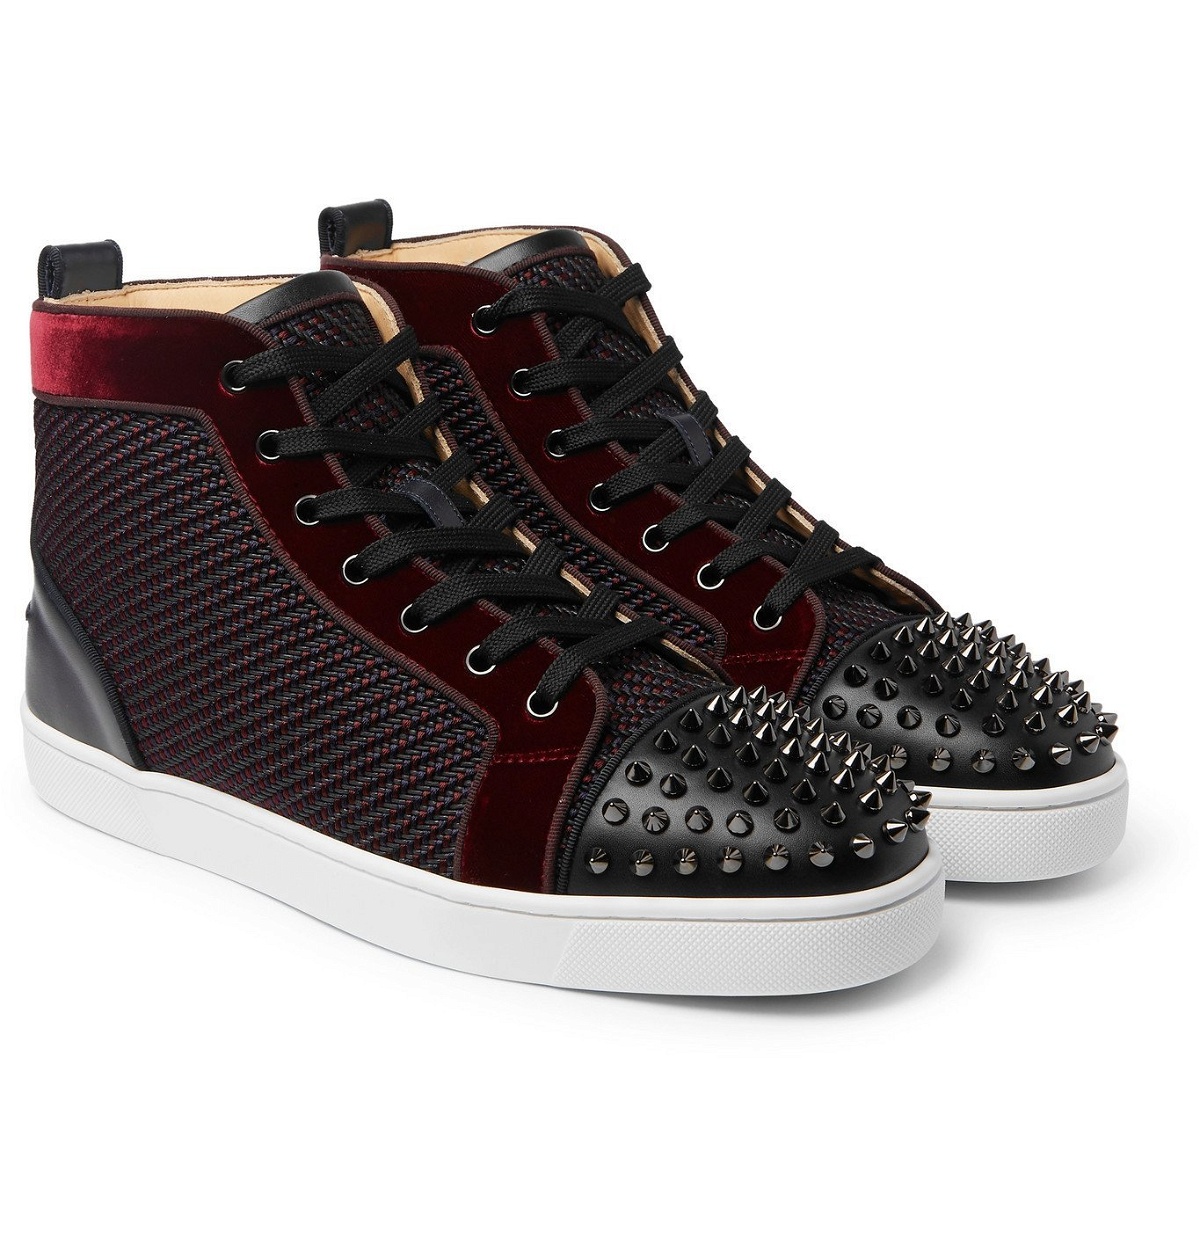 Christian Louboutin Multicolor Leather Lou Spike High Top Sneakers